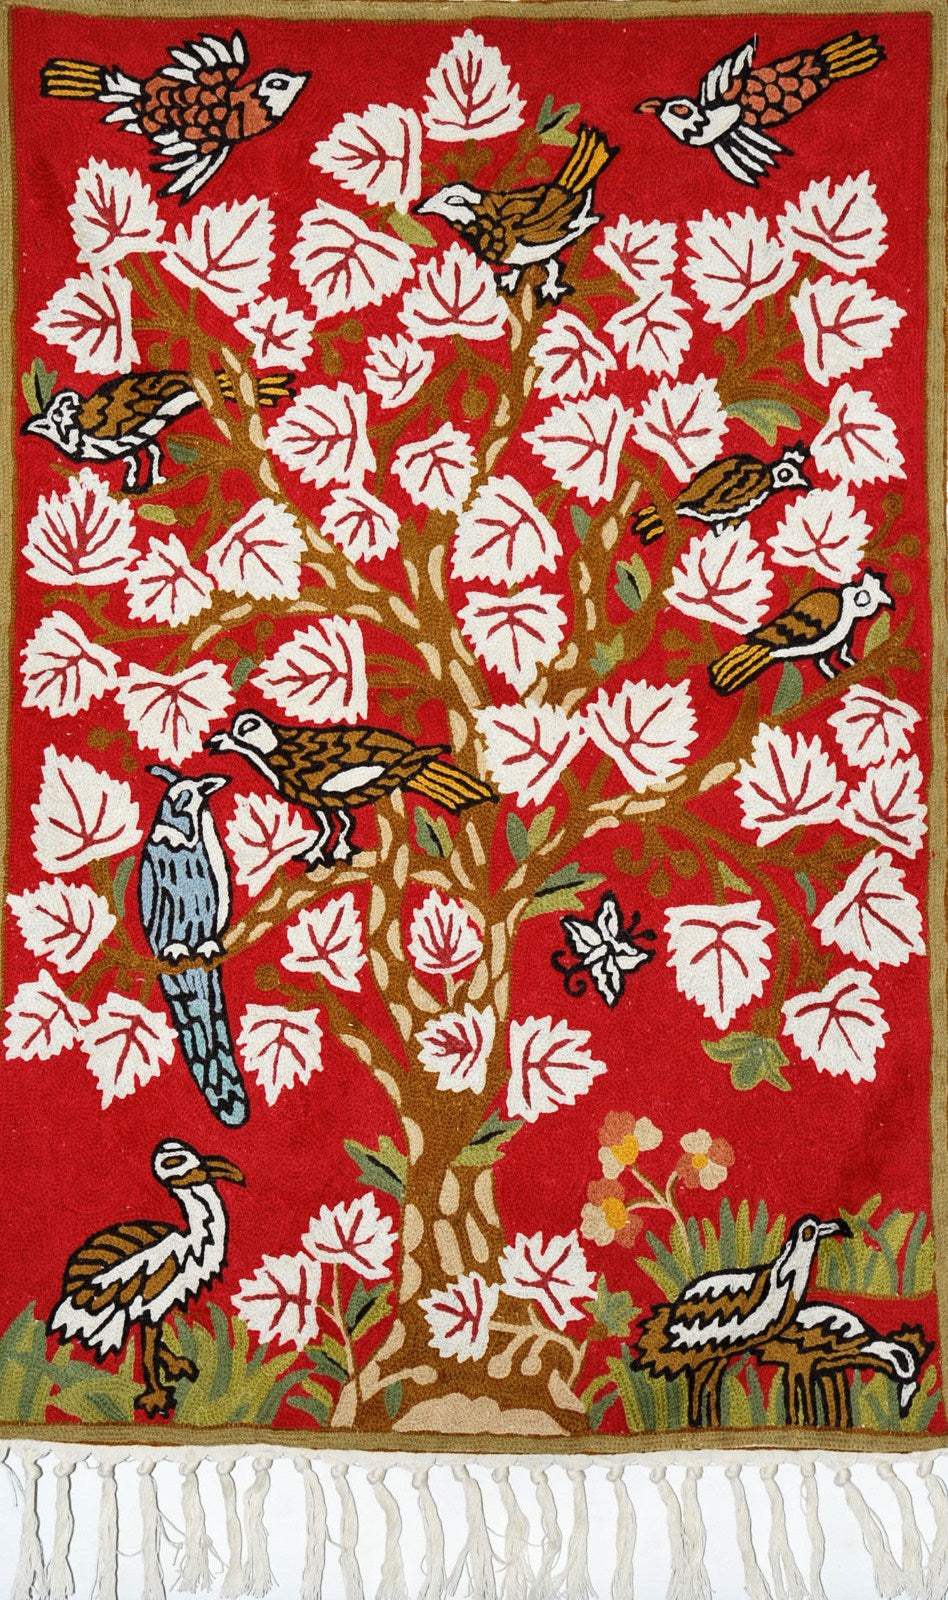 ChainStitch Tapestry Wall Hanging Area Rug "Maple Tree Birds", Multicolor Embroidery 2x3 feet #CWR6115